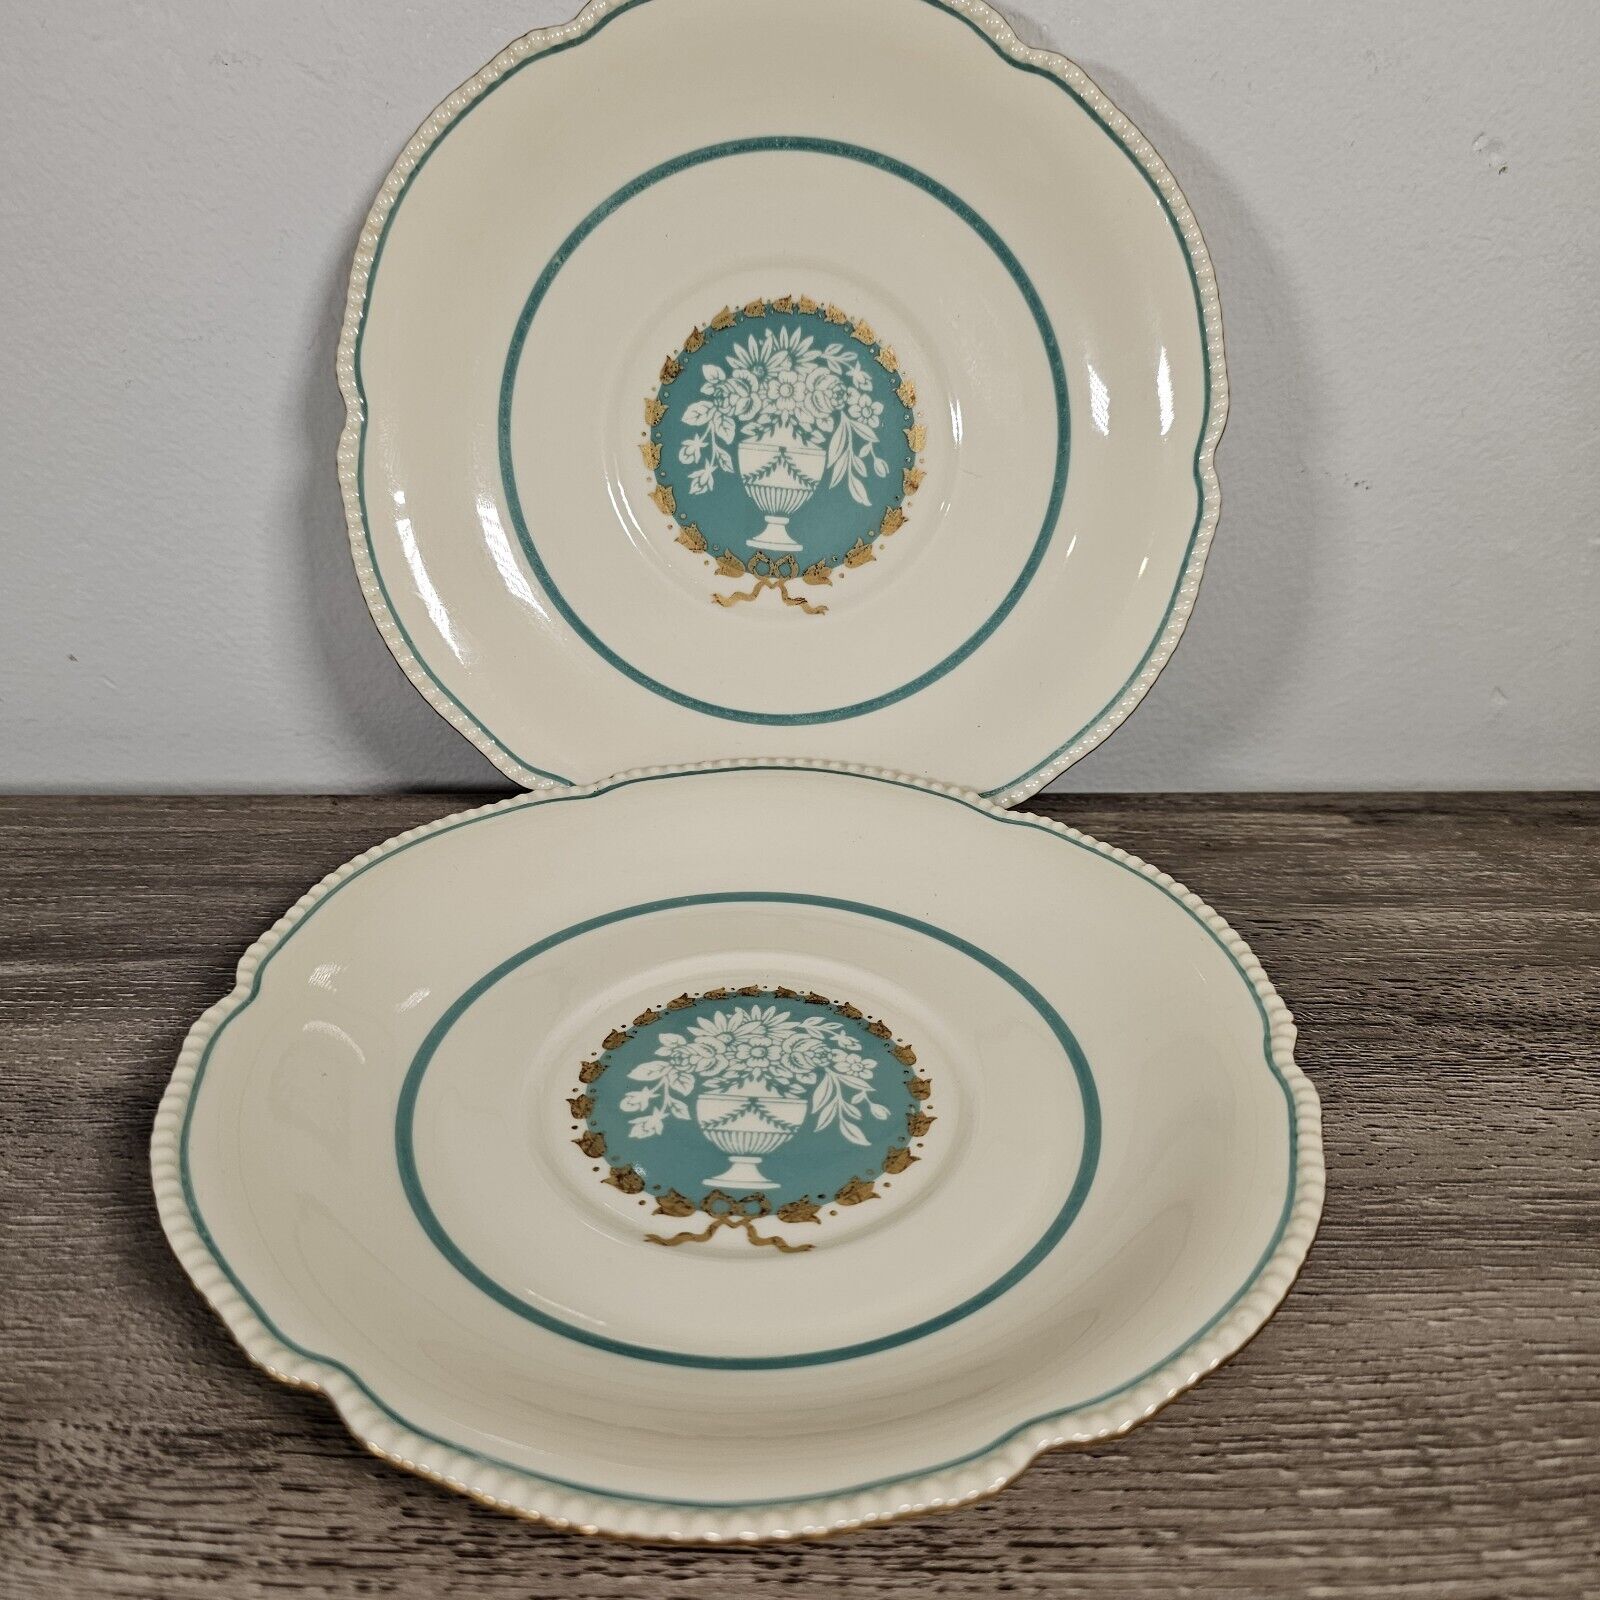 Rosenthal Continental Ivory Classis Teacups Turquoise Center Saucers Set of 2